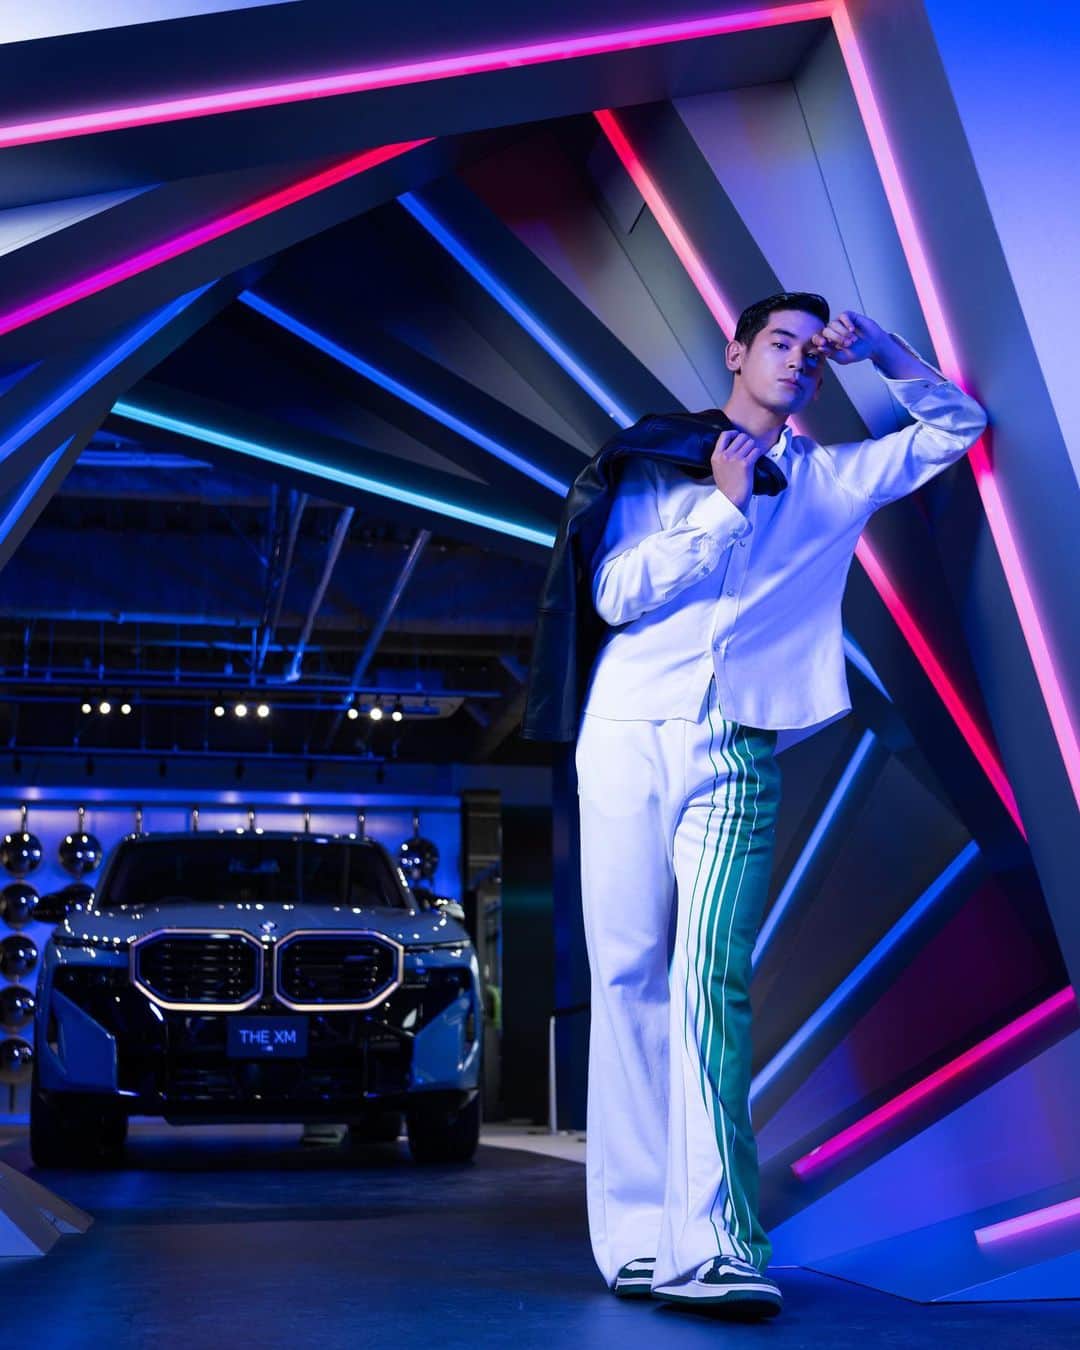 UTAのインスタグラム：「FREUDE by BMW - Connected Through Time x UTA x Safari Event  Good vibes, great people at the BMW XM event! Got to walk a fashion show, join a talk show and experienced the full world of the new BMW XM!  @bmw XMのポップアップイベントでファッションショー、トークショーさせて頂きました！  @safarionline_official 編集長ともたくさんXMの世界観トークしました。  お越しくださった方々、ありがとうございました！原宿にて、4／4までXM展示を開催中なので、ぜひご来場してください！」